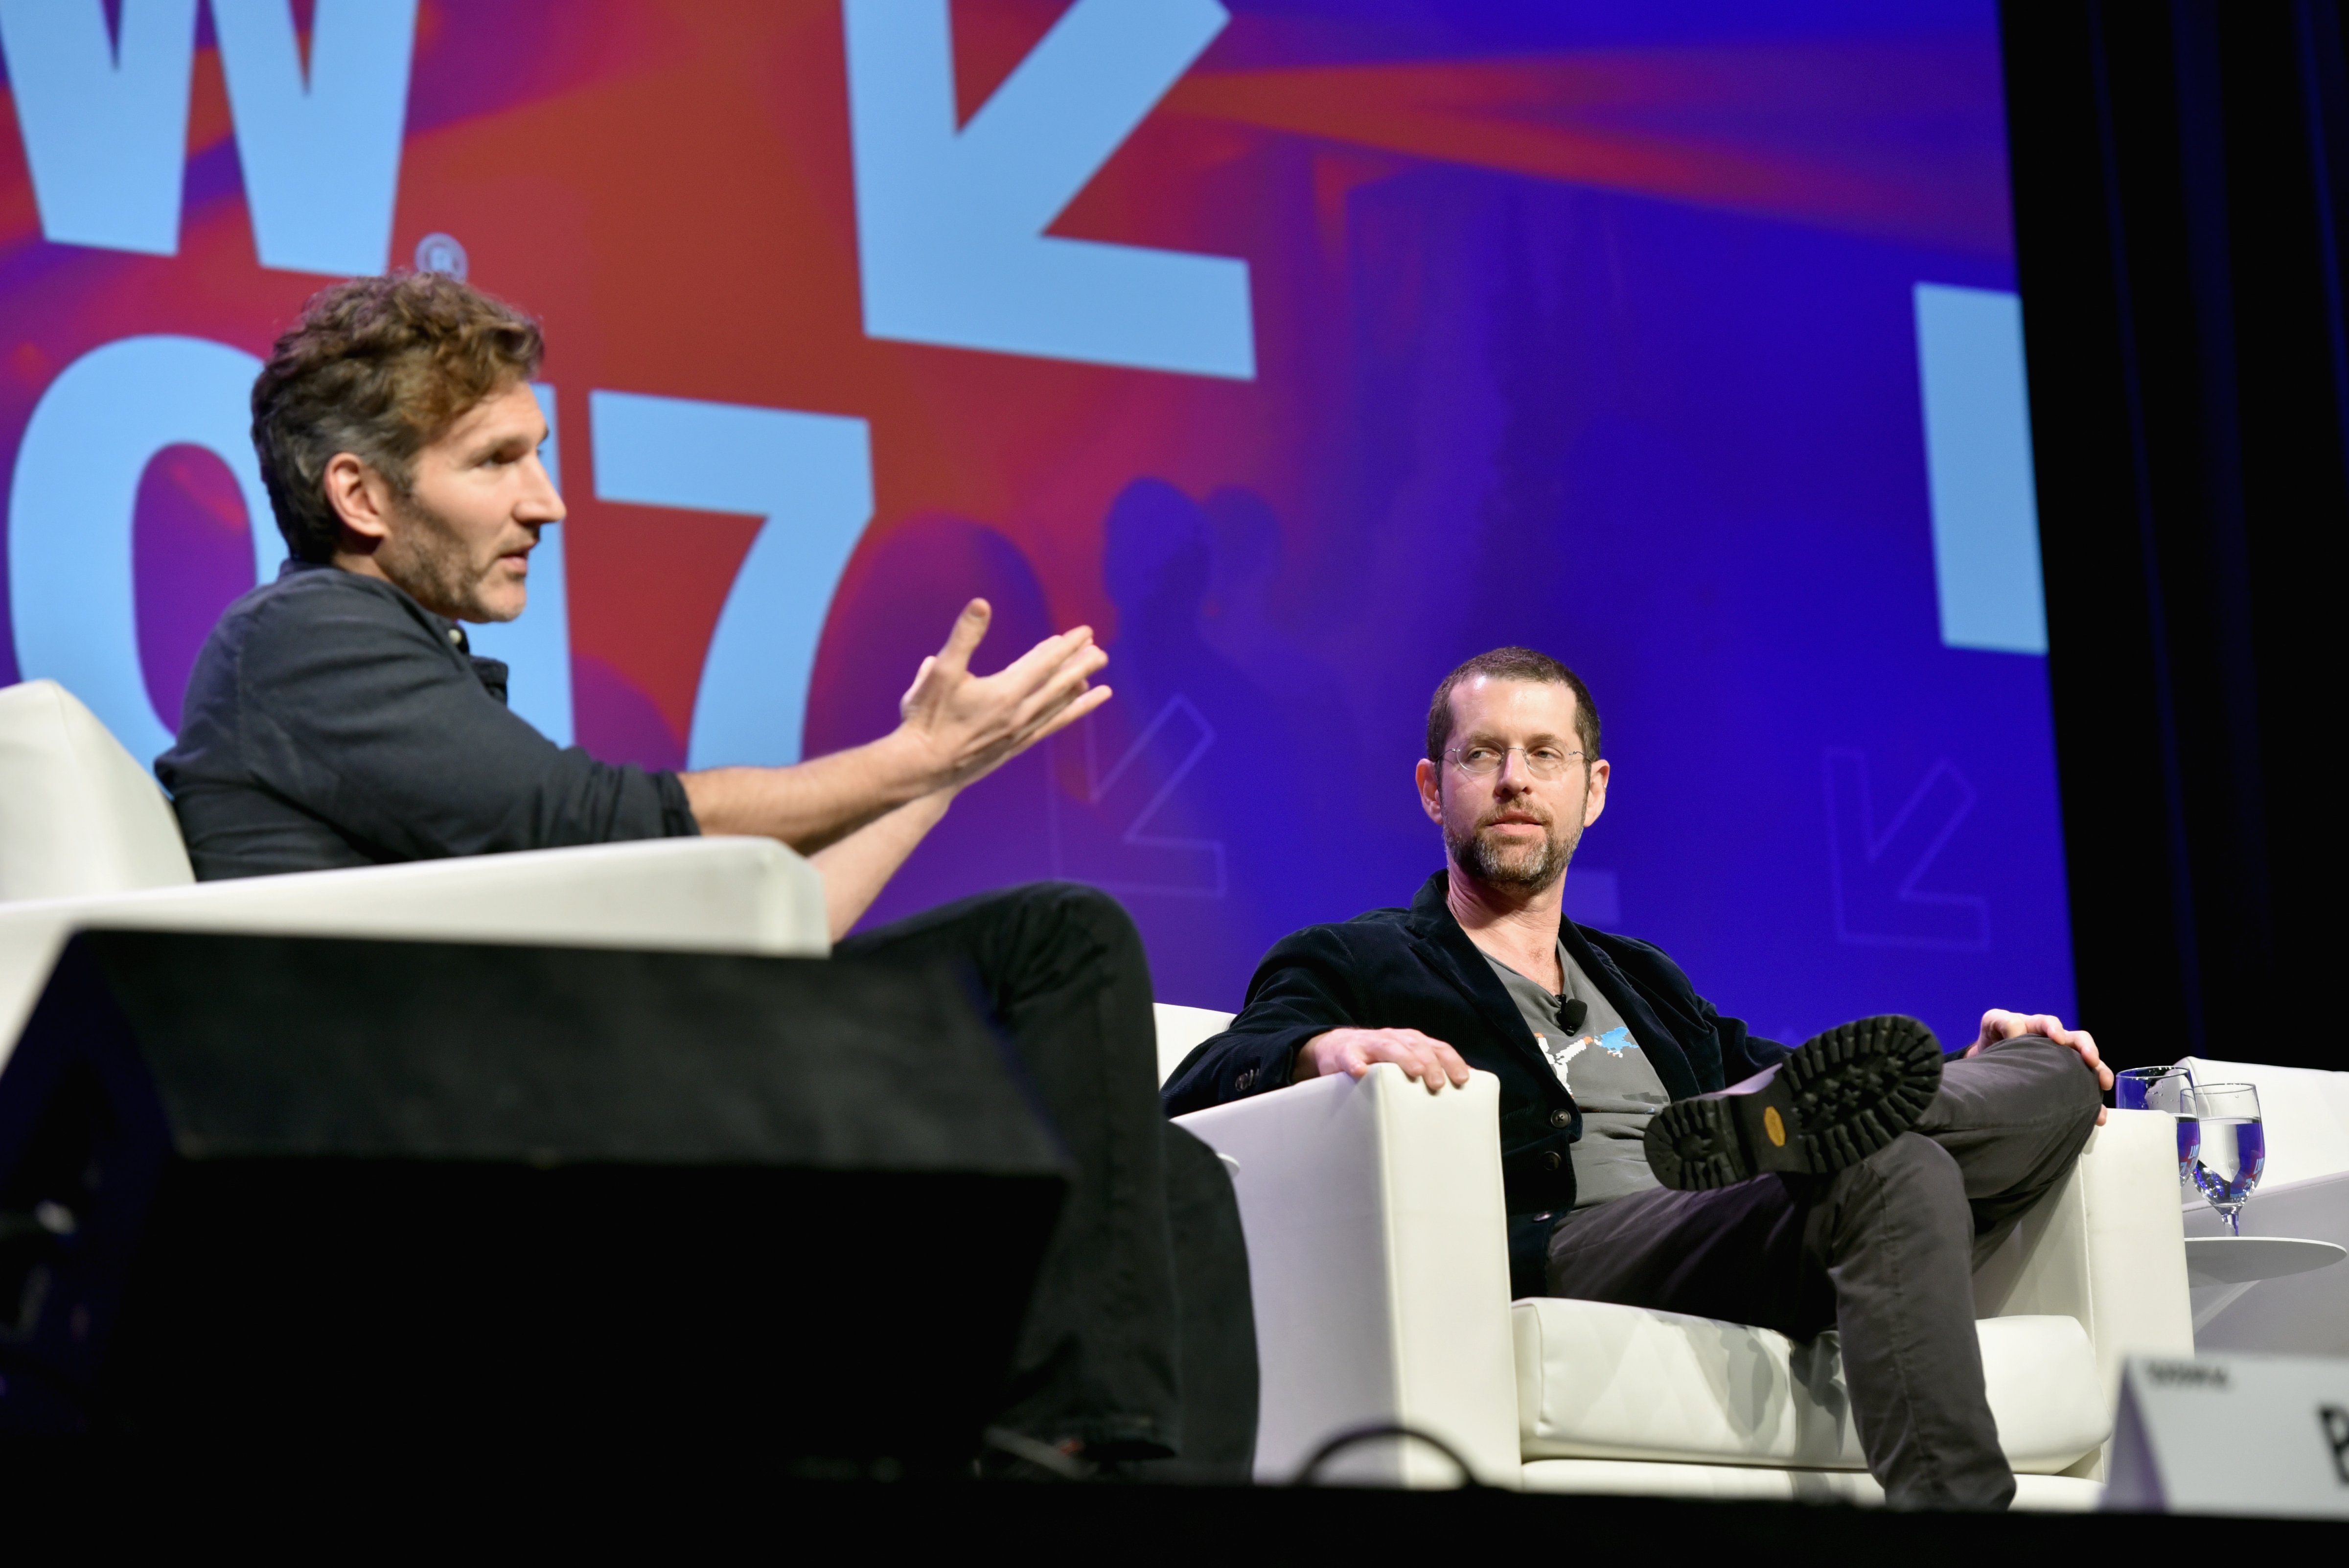 Writers David Benioff (L) and  D.B. Weiss speak onstage at 'Featured Session: Game of Thrones' during 2017 SXSW Conference and Festivals at Austin Convention Center on March 12, 2017 in Austin, Texas. (Amy E. Price—Getty Images for SXSW)